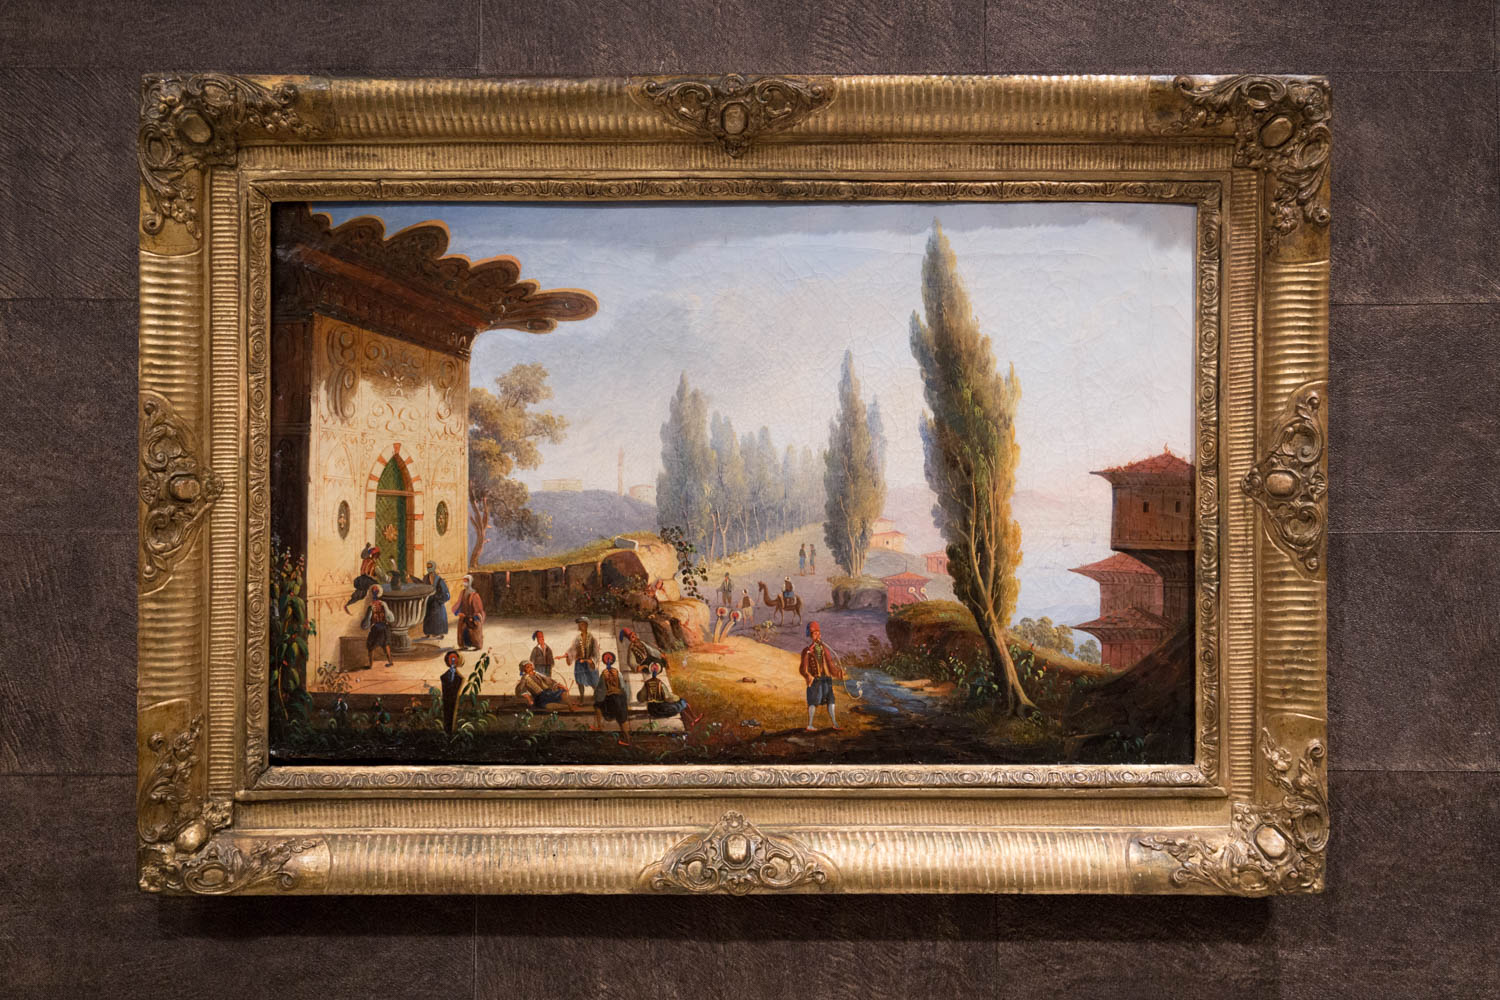 Orientalist French painting from 19th-century